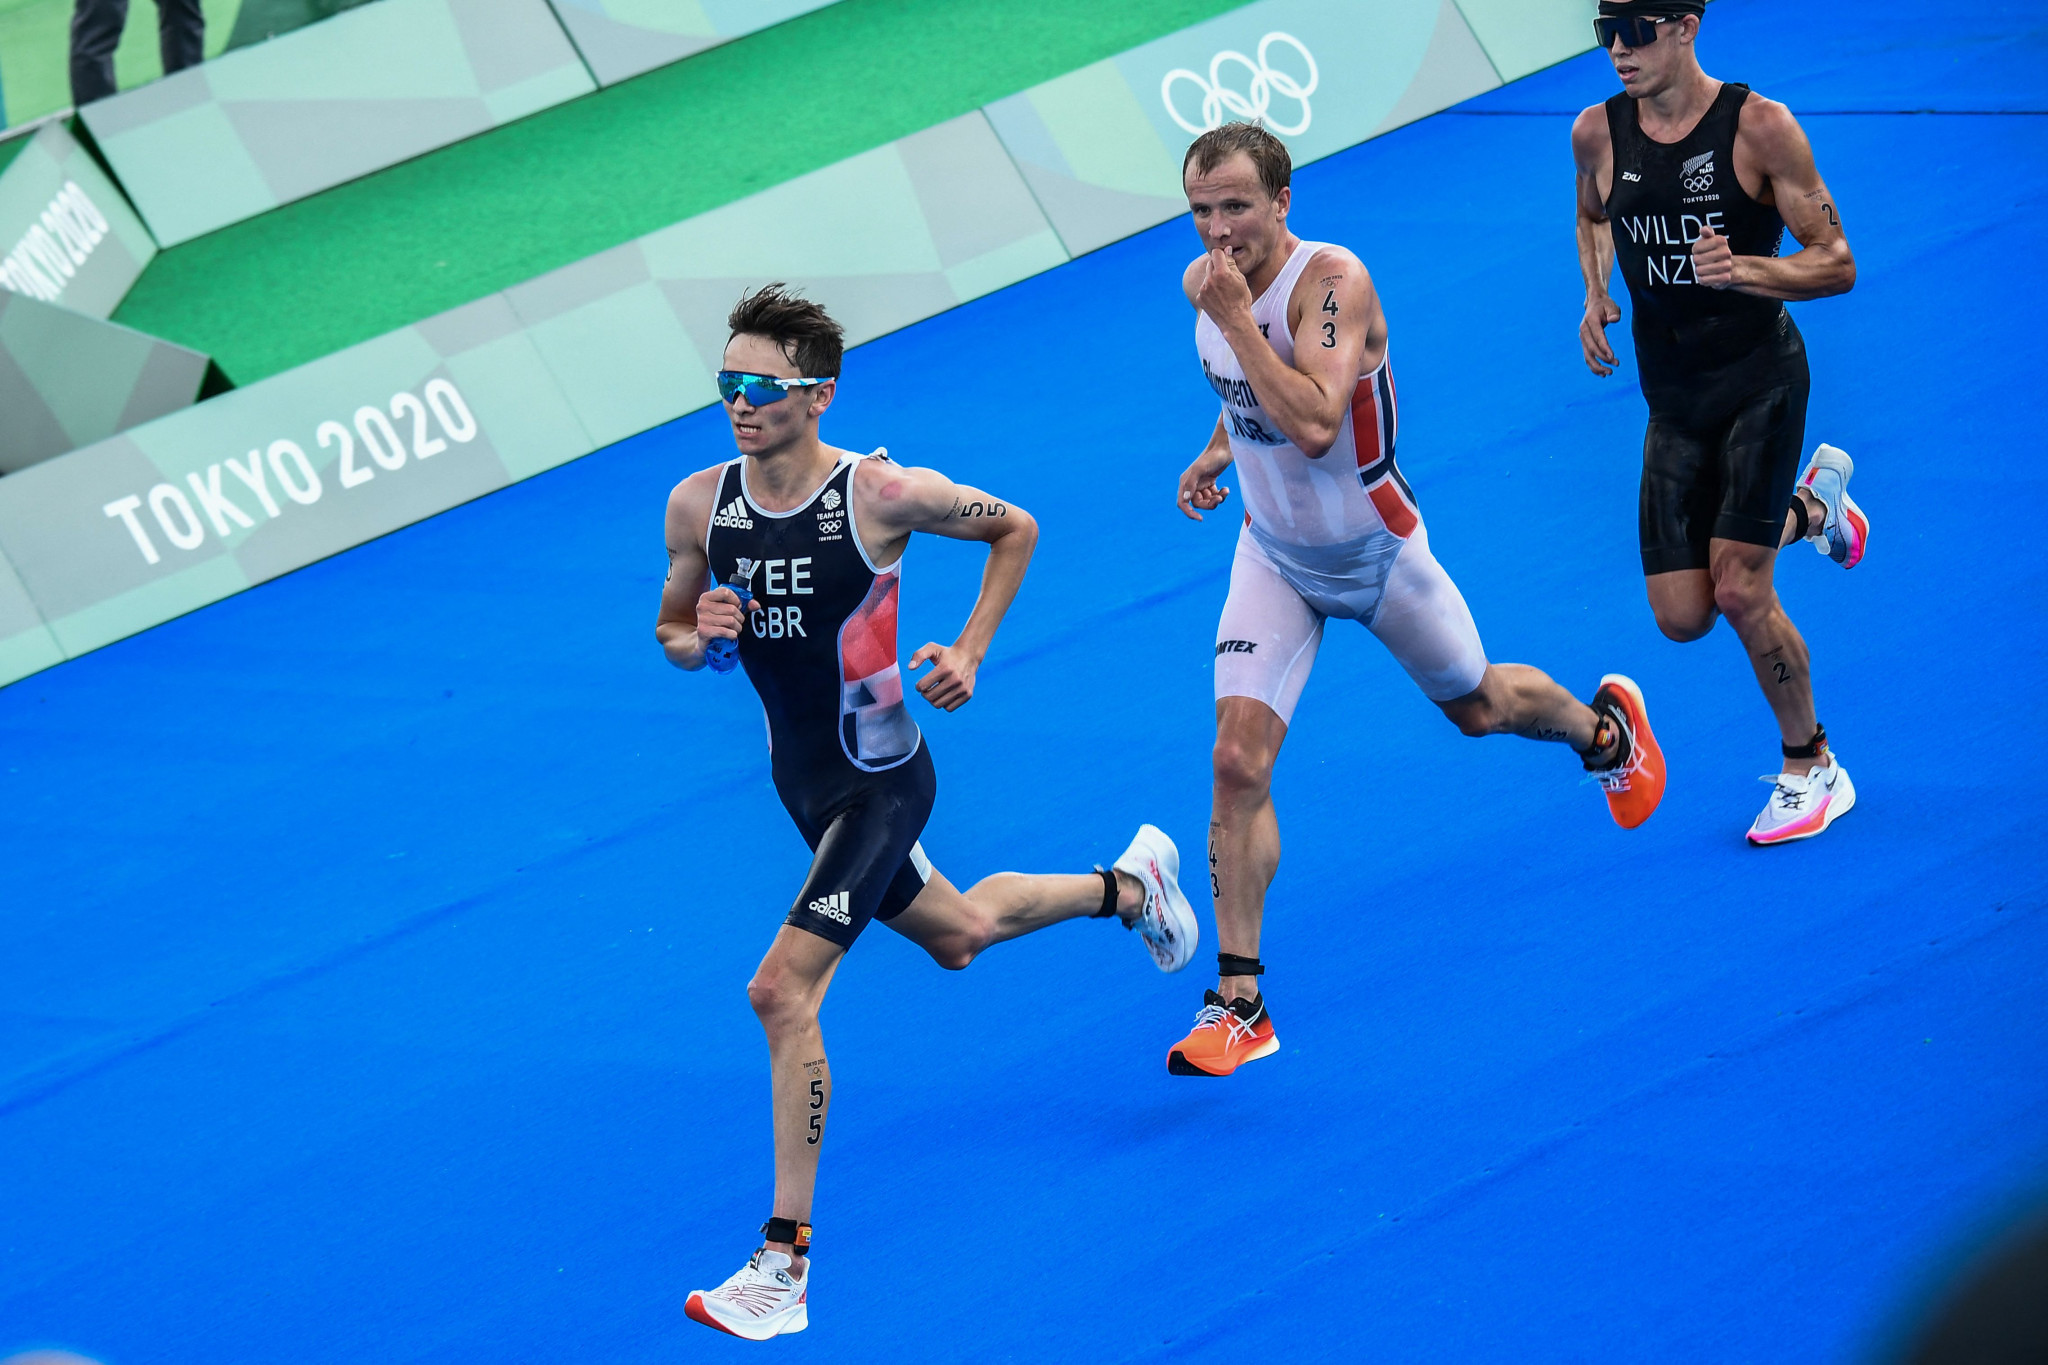 Alex Yee, left, Kristian Blummenfelt, centre, and Hayden Wilde, right, rounded out the triathlon medals at Tokyo 2020 ©Getty Images